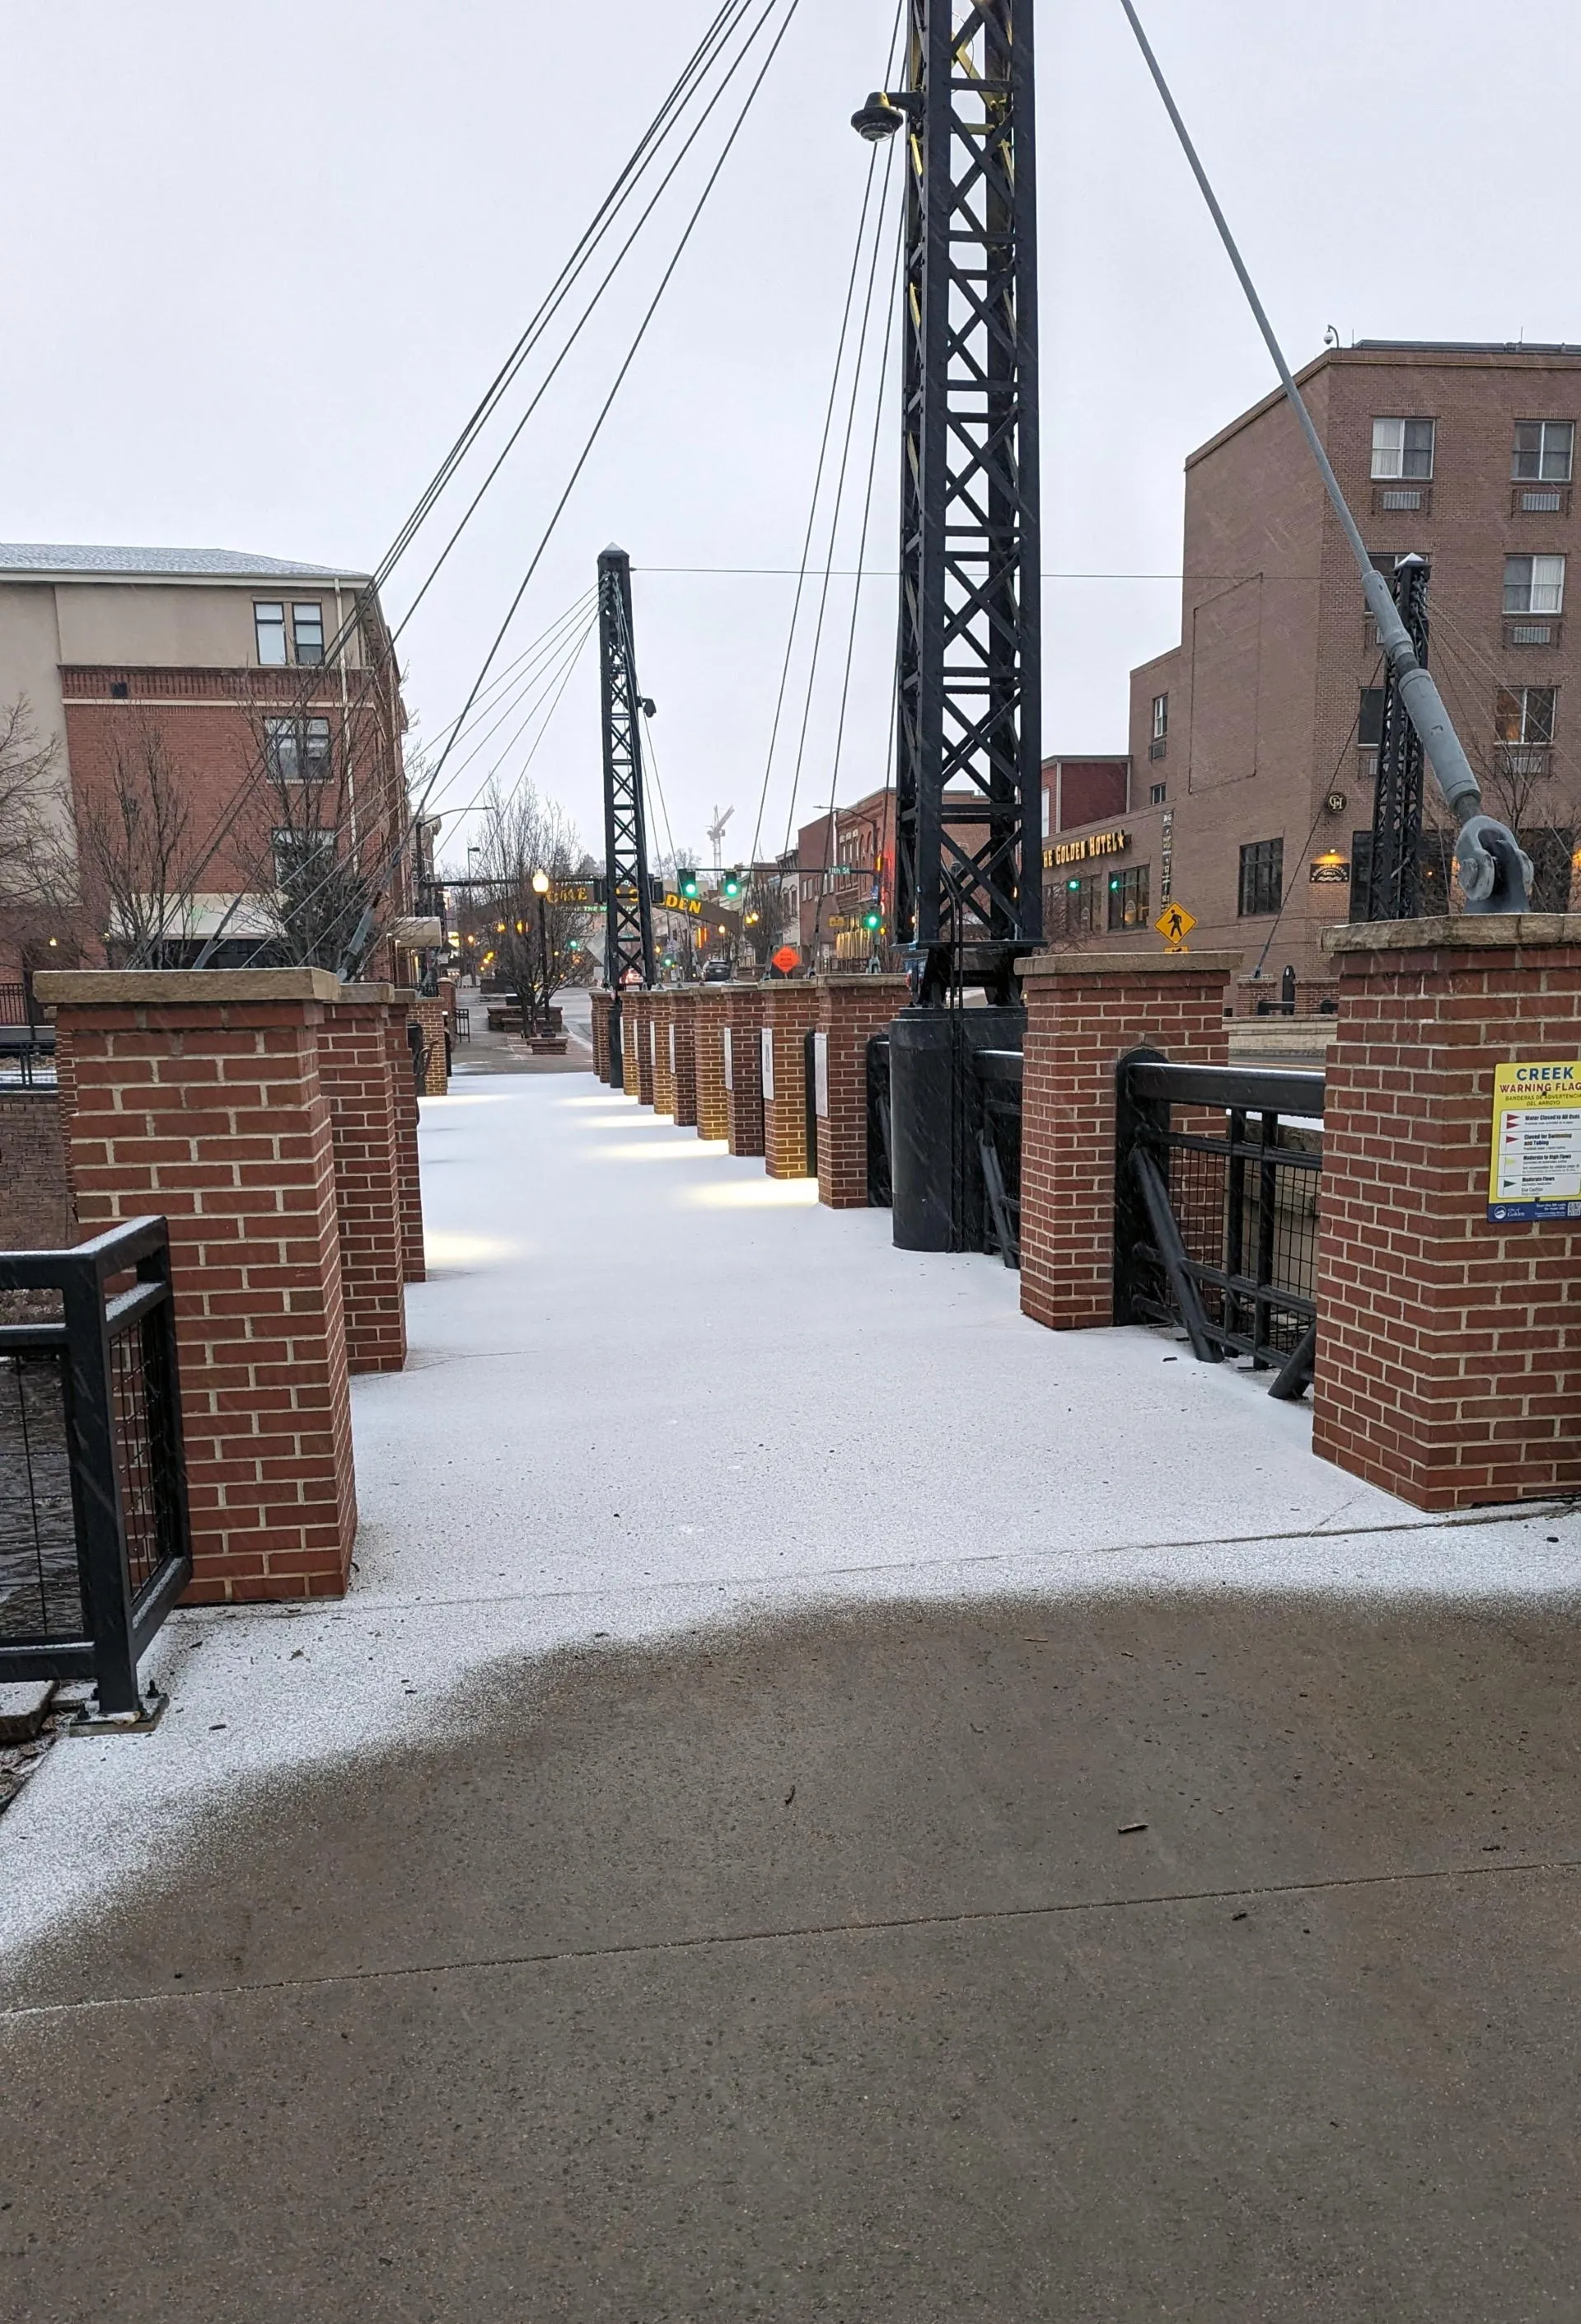 Sidewalk over the bridge is covered with snow, while the sidewalk on land is thawed.